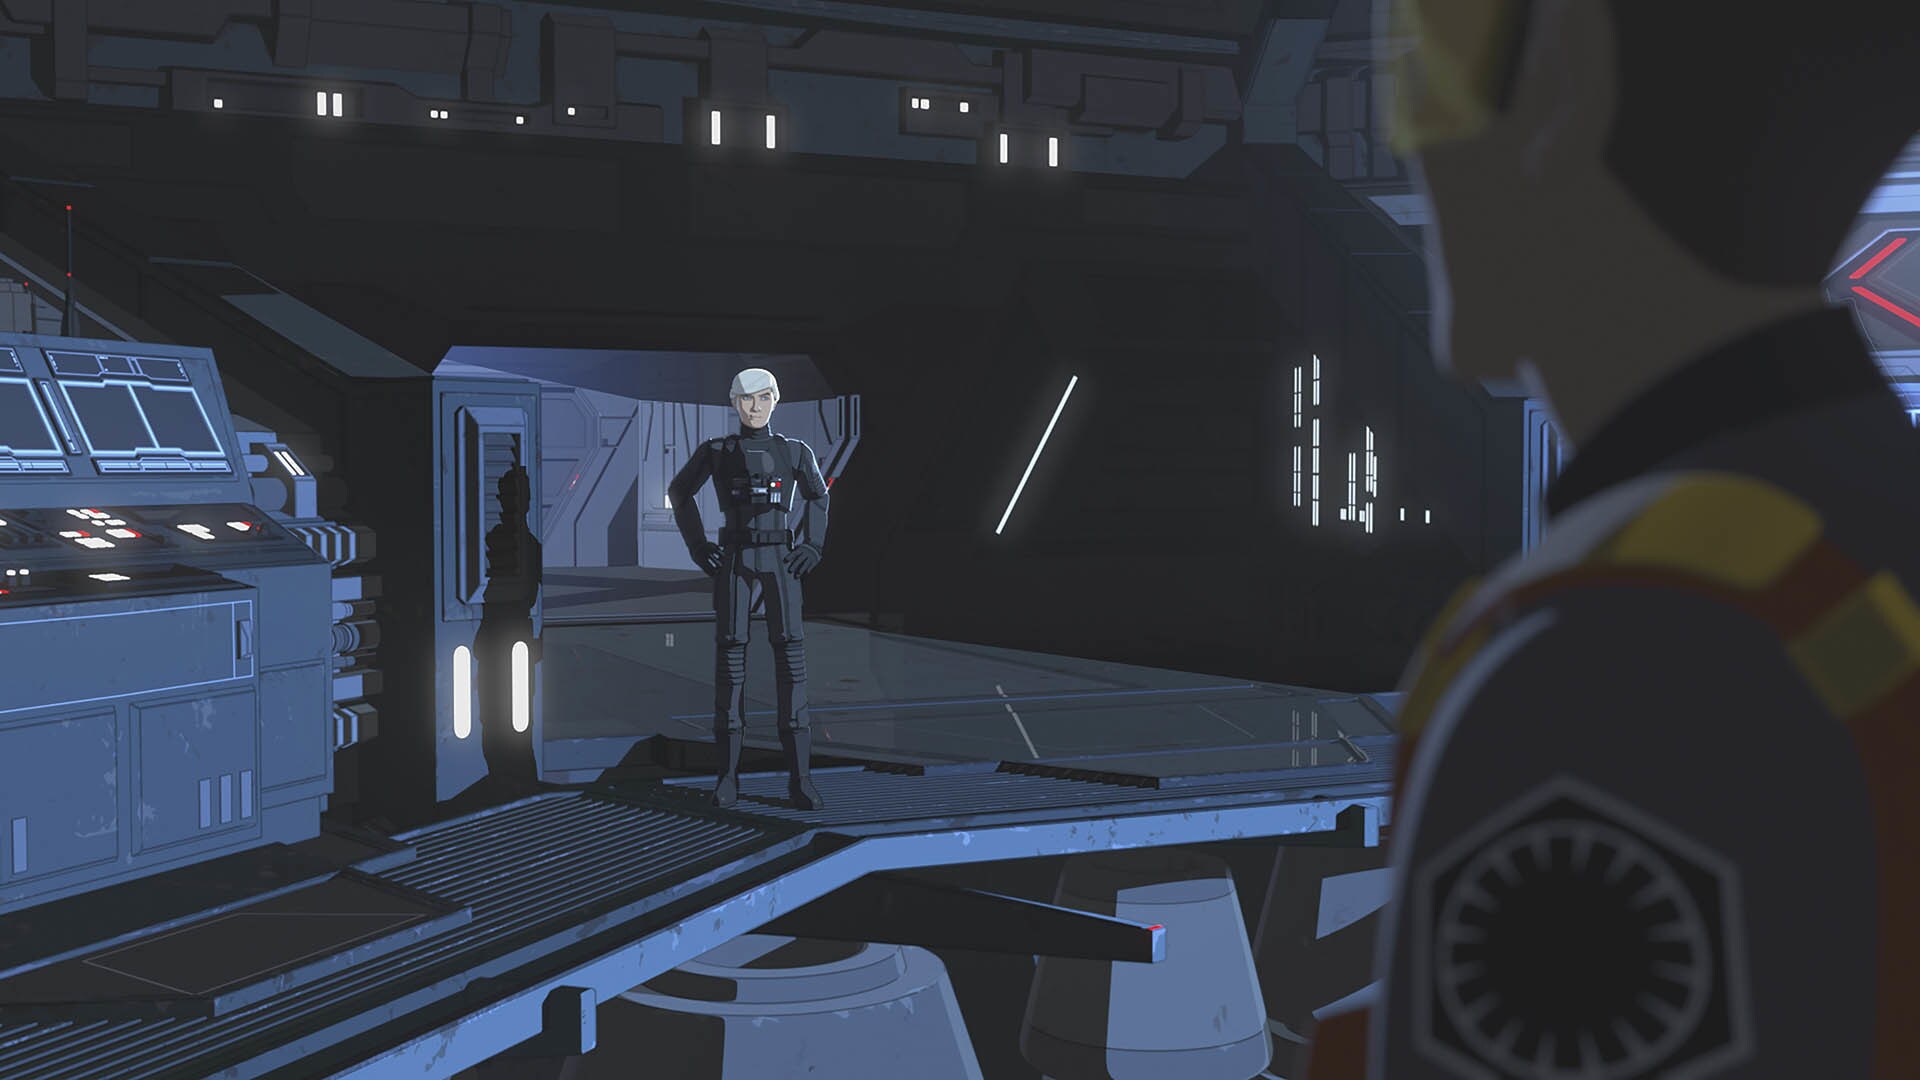 Kaz, Neeku, and CB-23 sneak through the ship and reach the engineering room. The droid leaves to ...